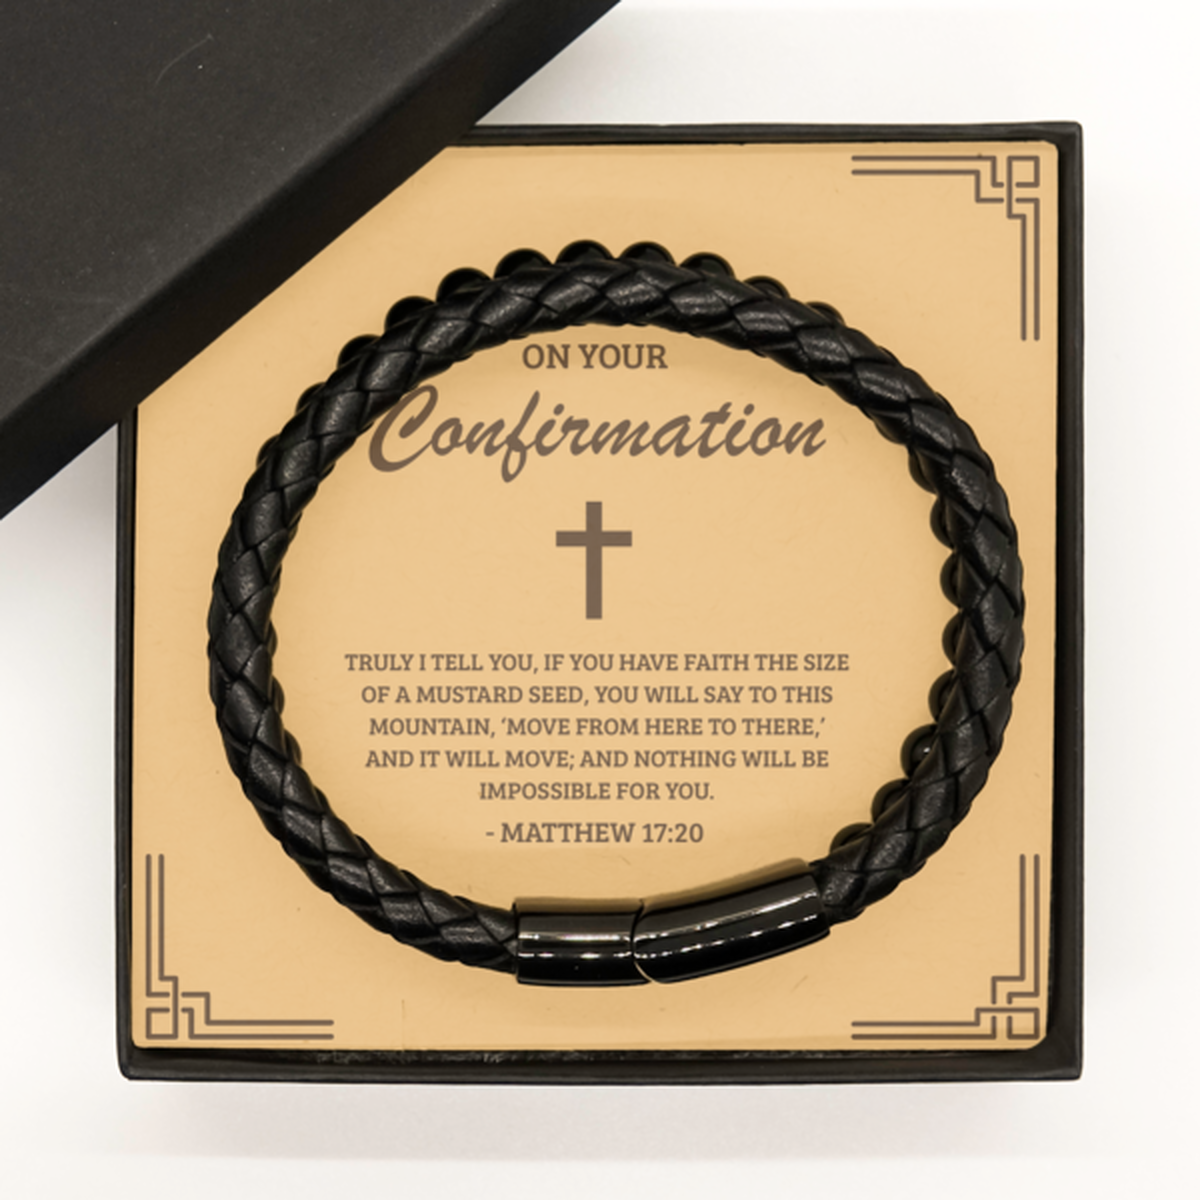 Confirmation Gifts for Teenage Boys, Truly I tell you, if you have faith, Stone Leather Bracelet with Bible Verse Message Card, Religious Catholic Bracelet for Son, Grandson, Dad, Godfather